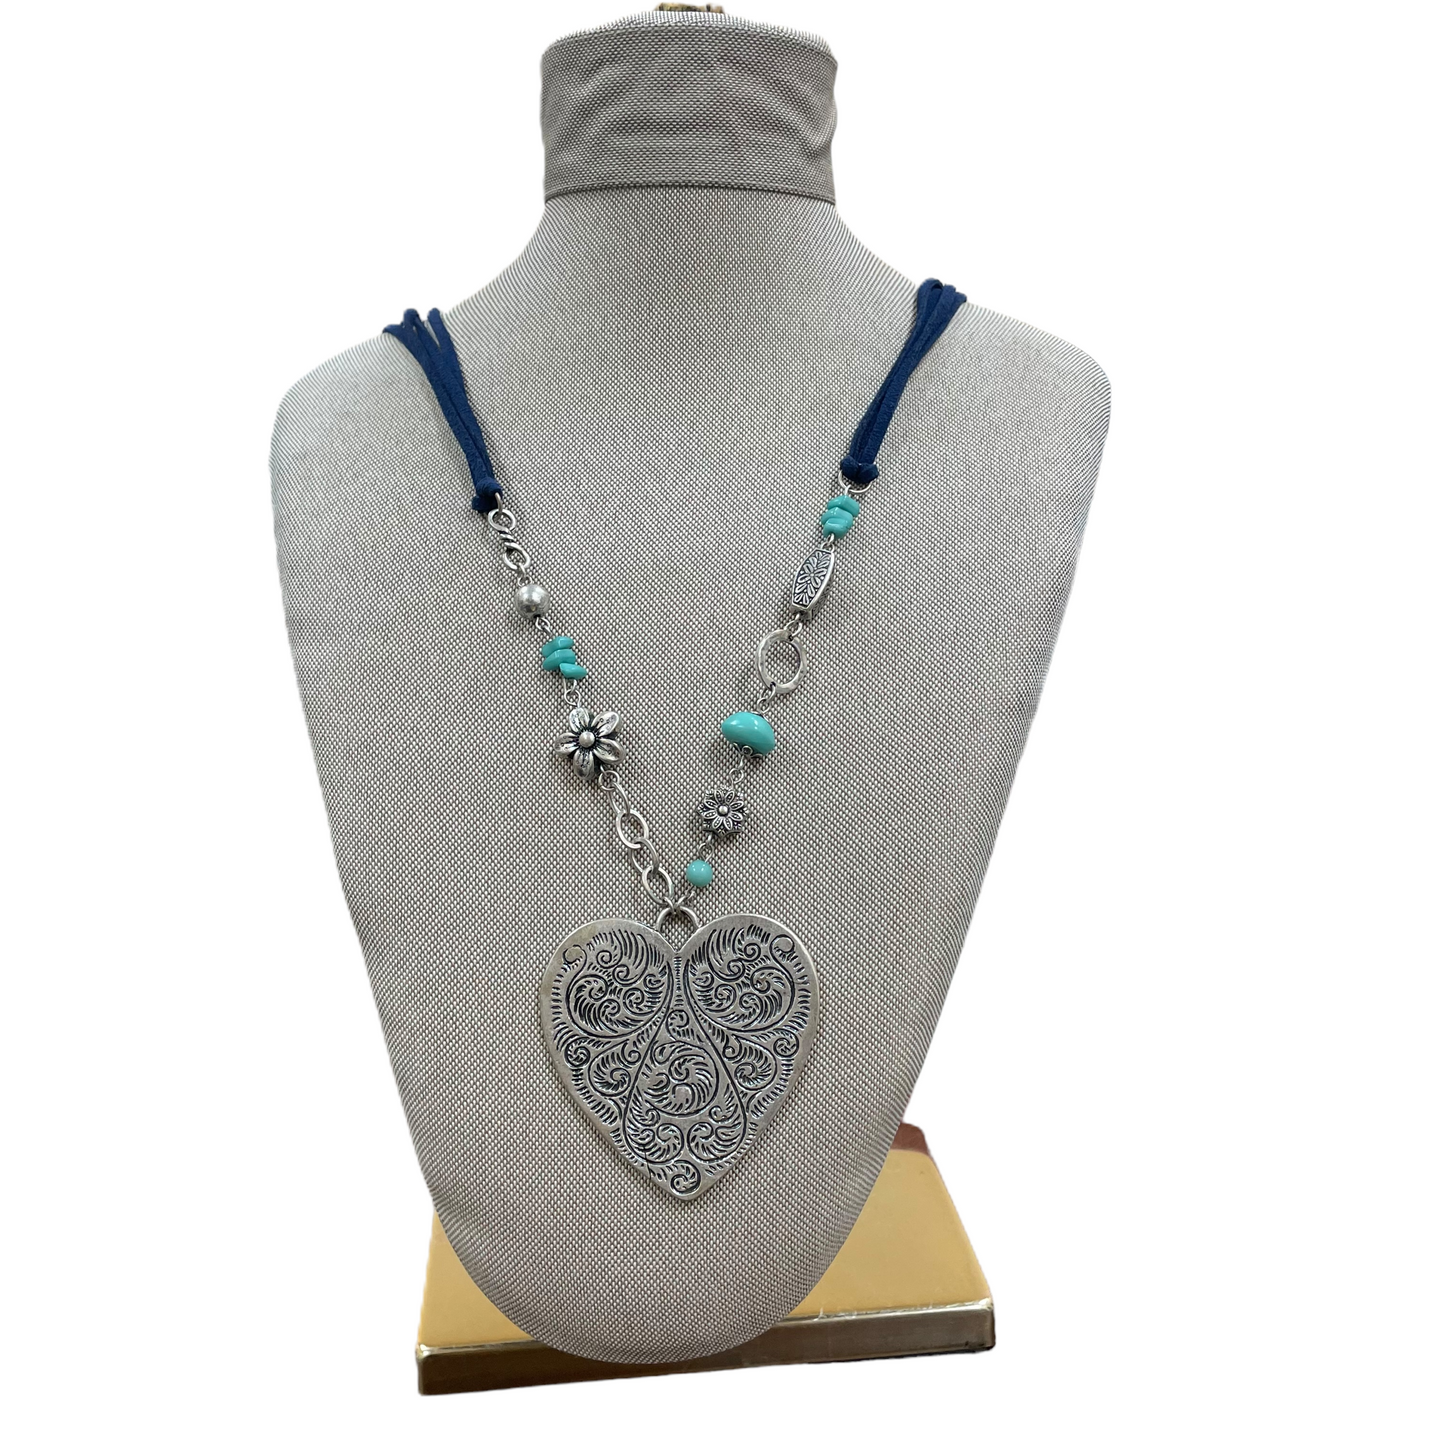 Necklace Statement By Cme